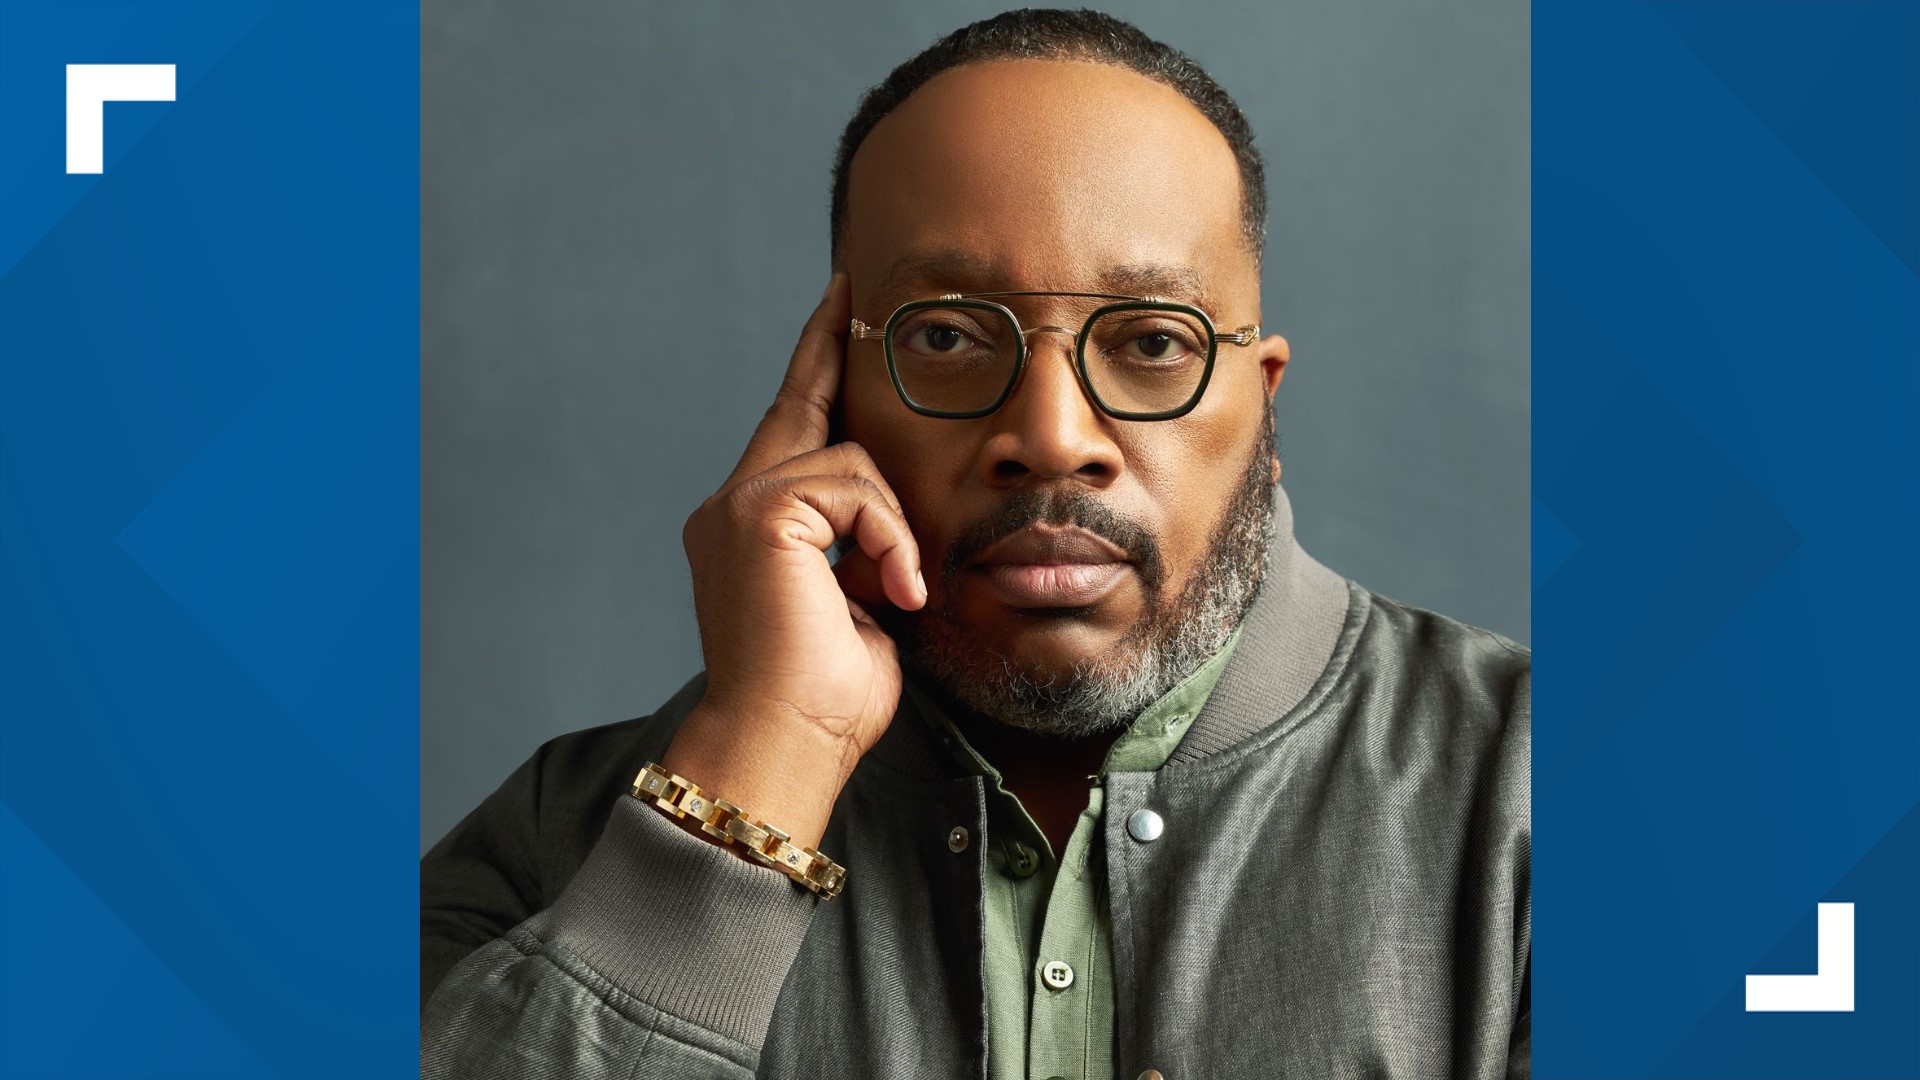 There’s a new movie celebrating the work of Grand Rapids native, Marvin Sapp, the globally recognized pastor and gospel singer.